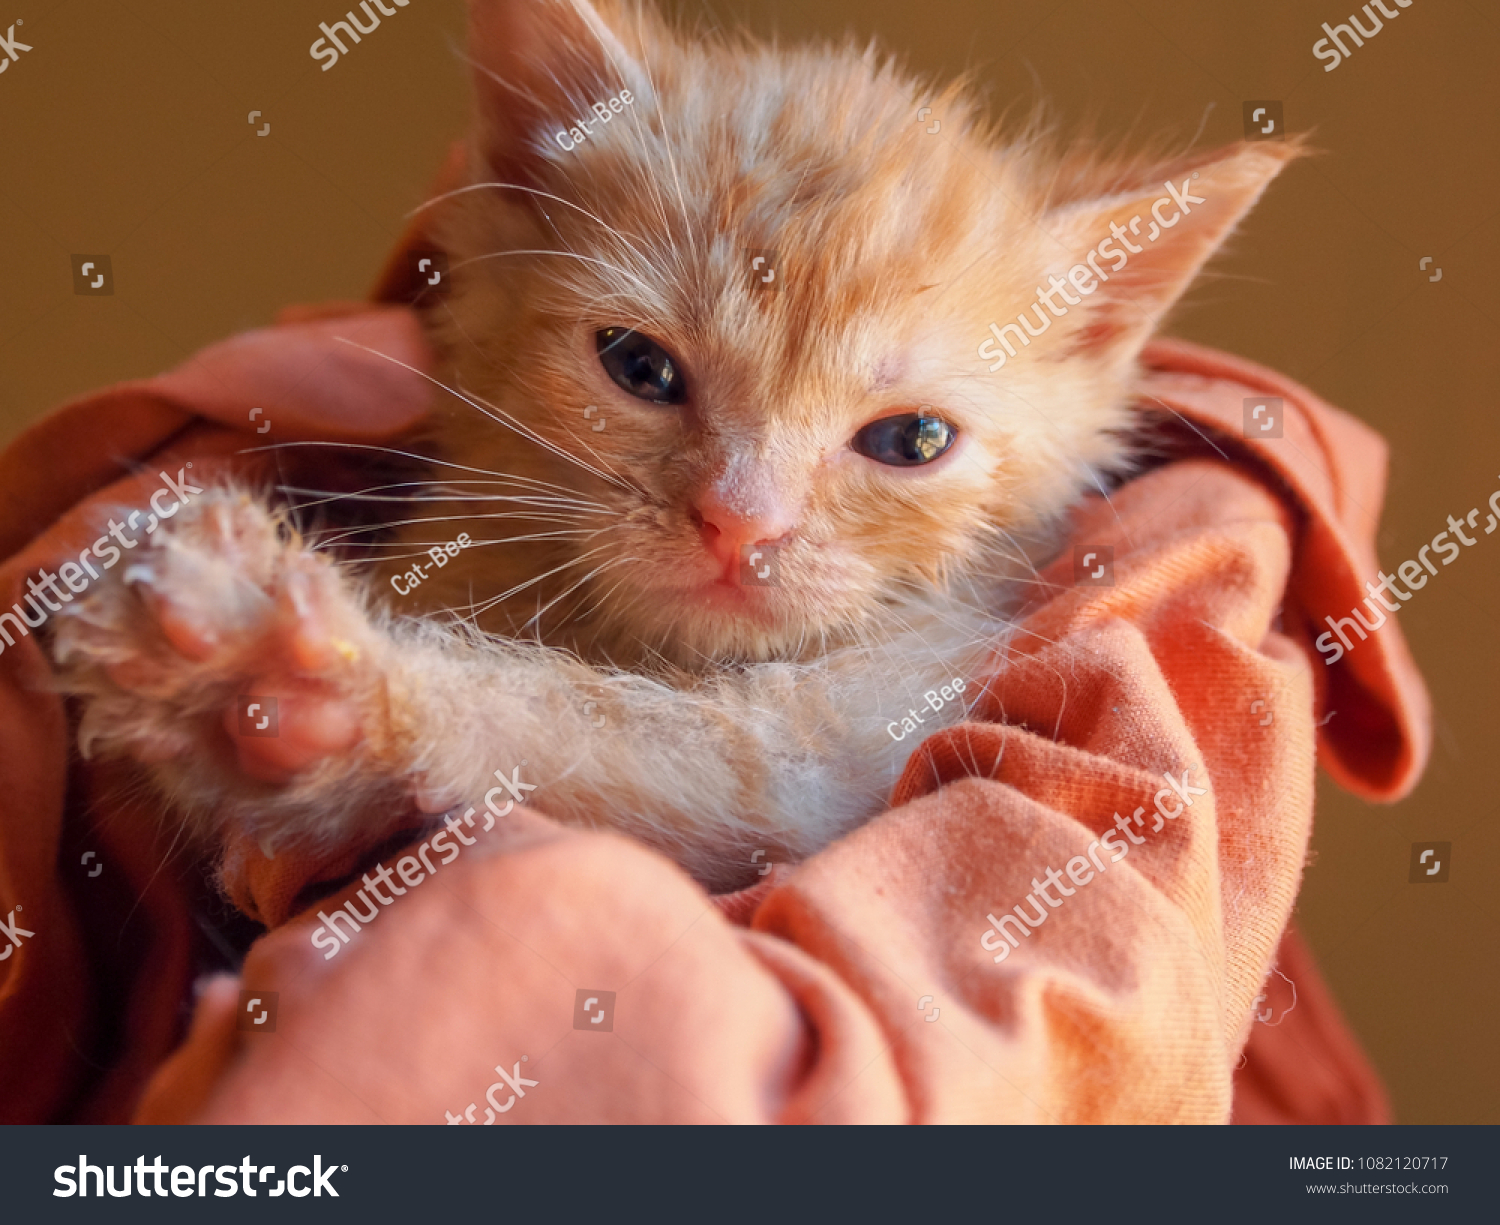 Orange tabby kitten wrapped in orange and looking sleepy. Yellow background, natural light. #1082120717